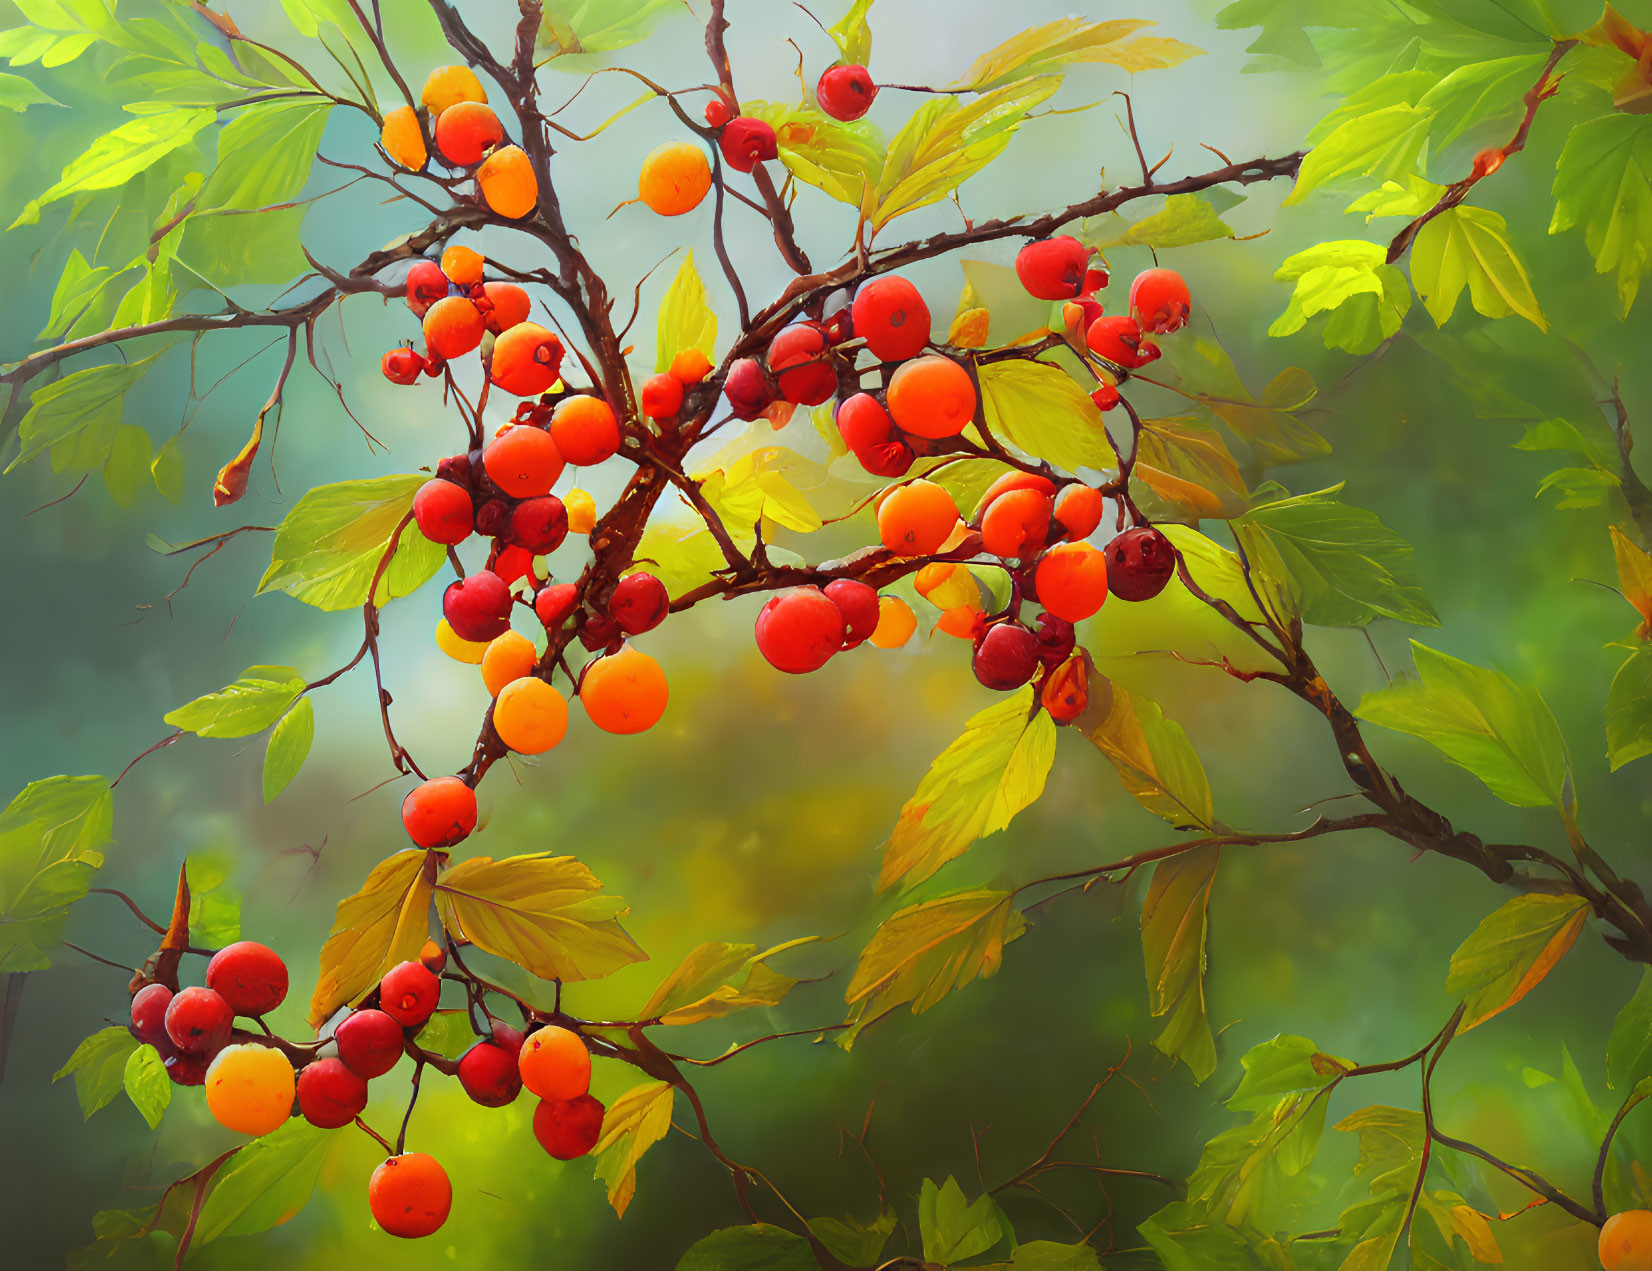 Colorful branch with red and orange berries in lush forest setting